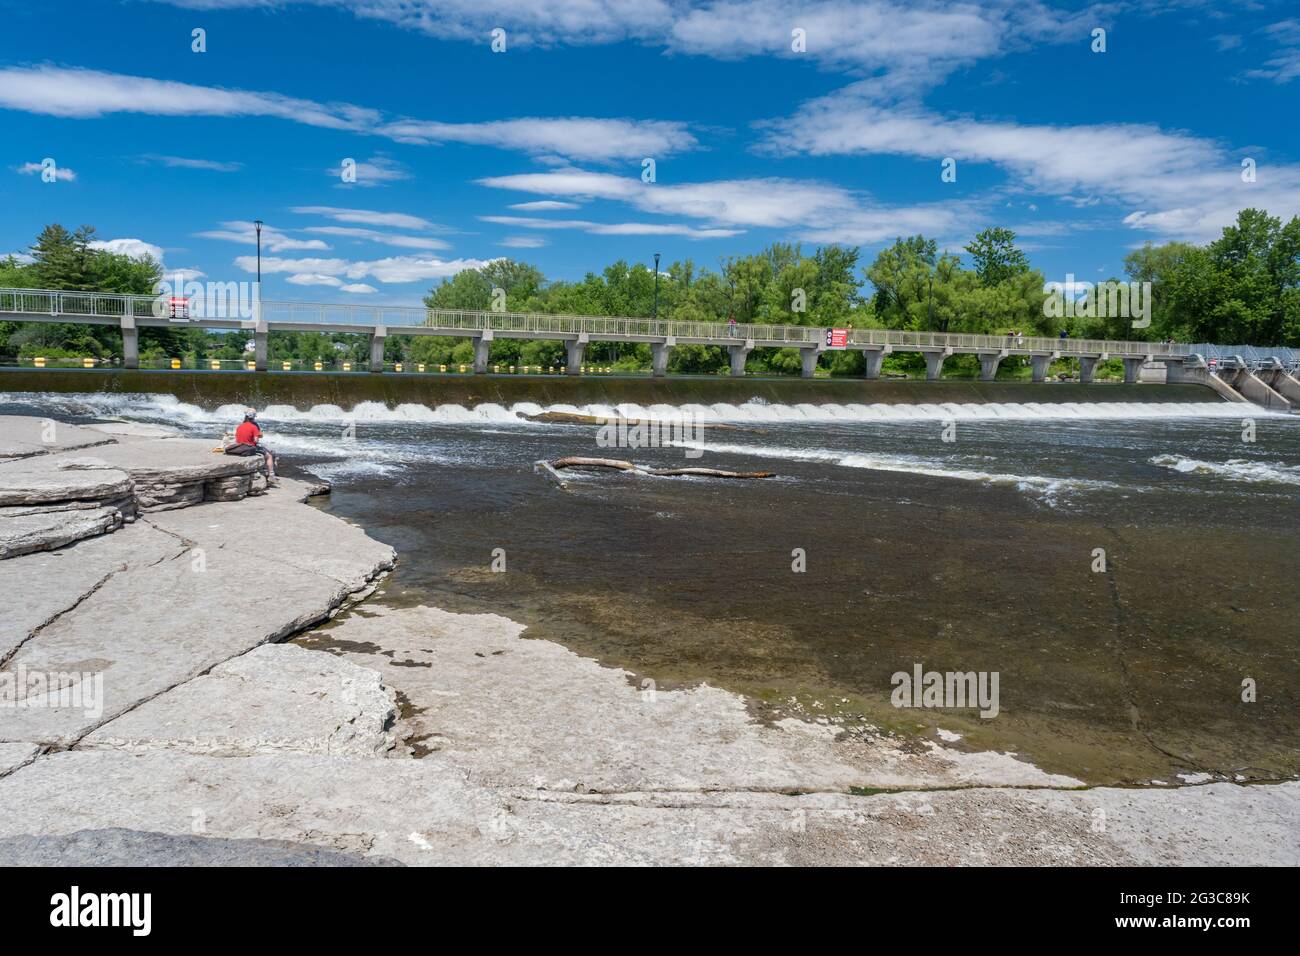 Terrebonne, Quebec, Canada - 11 June 2021: The Moulin neuf (New Mill) and Moulin-Neuf dam at the Île-des-moulins Stock Photo